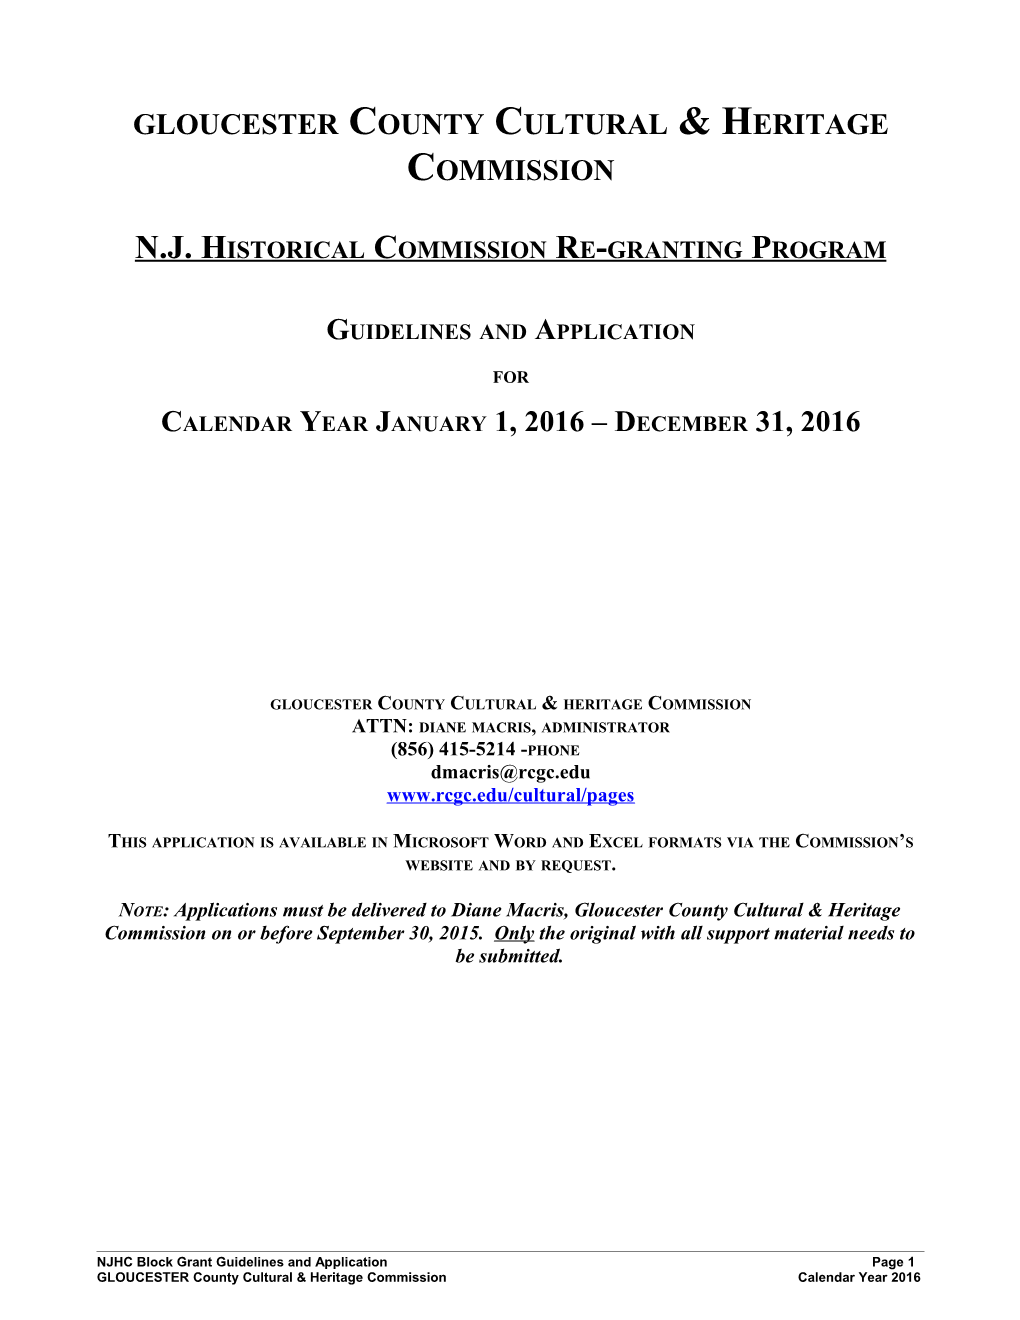 Gloucester County Cultural & Heritage Commission